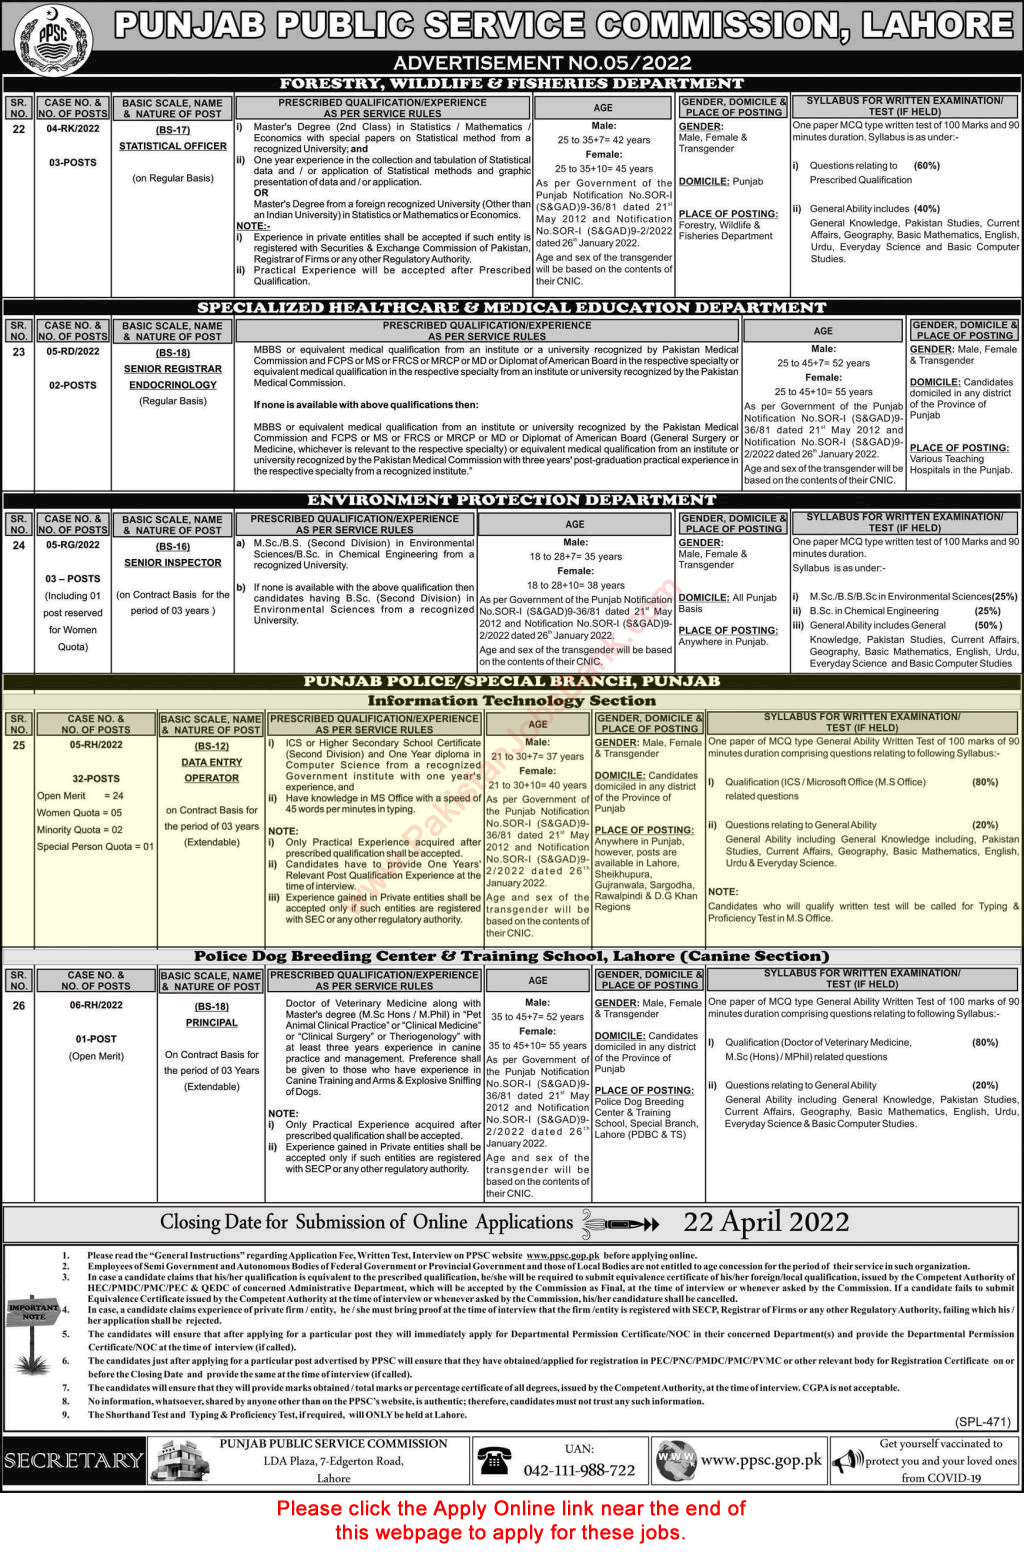 Data Entry Operator Jobs in Punjab Police April 2022 PPSC Apply Online Special Branch in Information Technology Board Latest